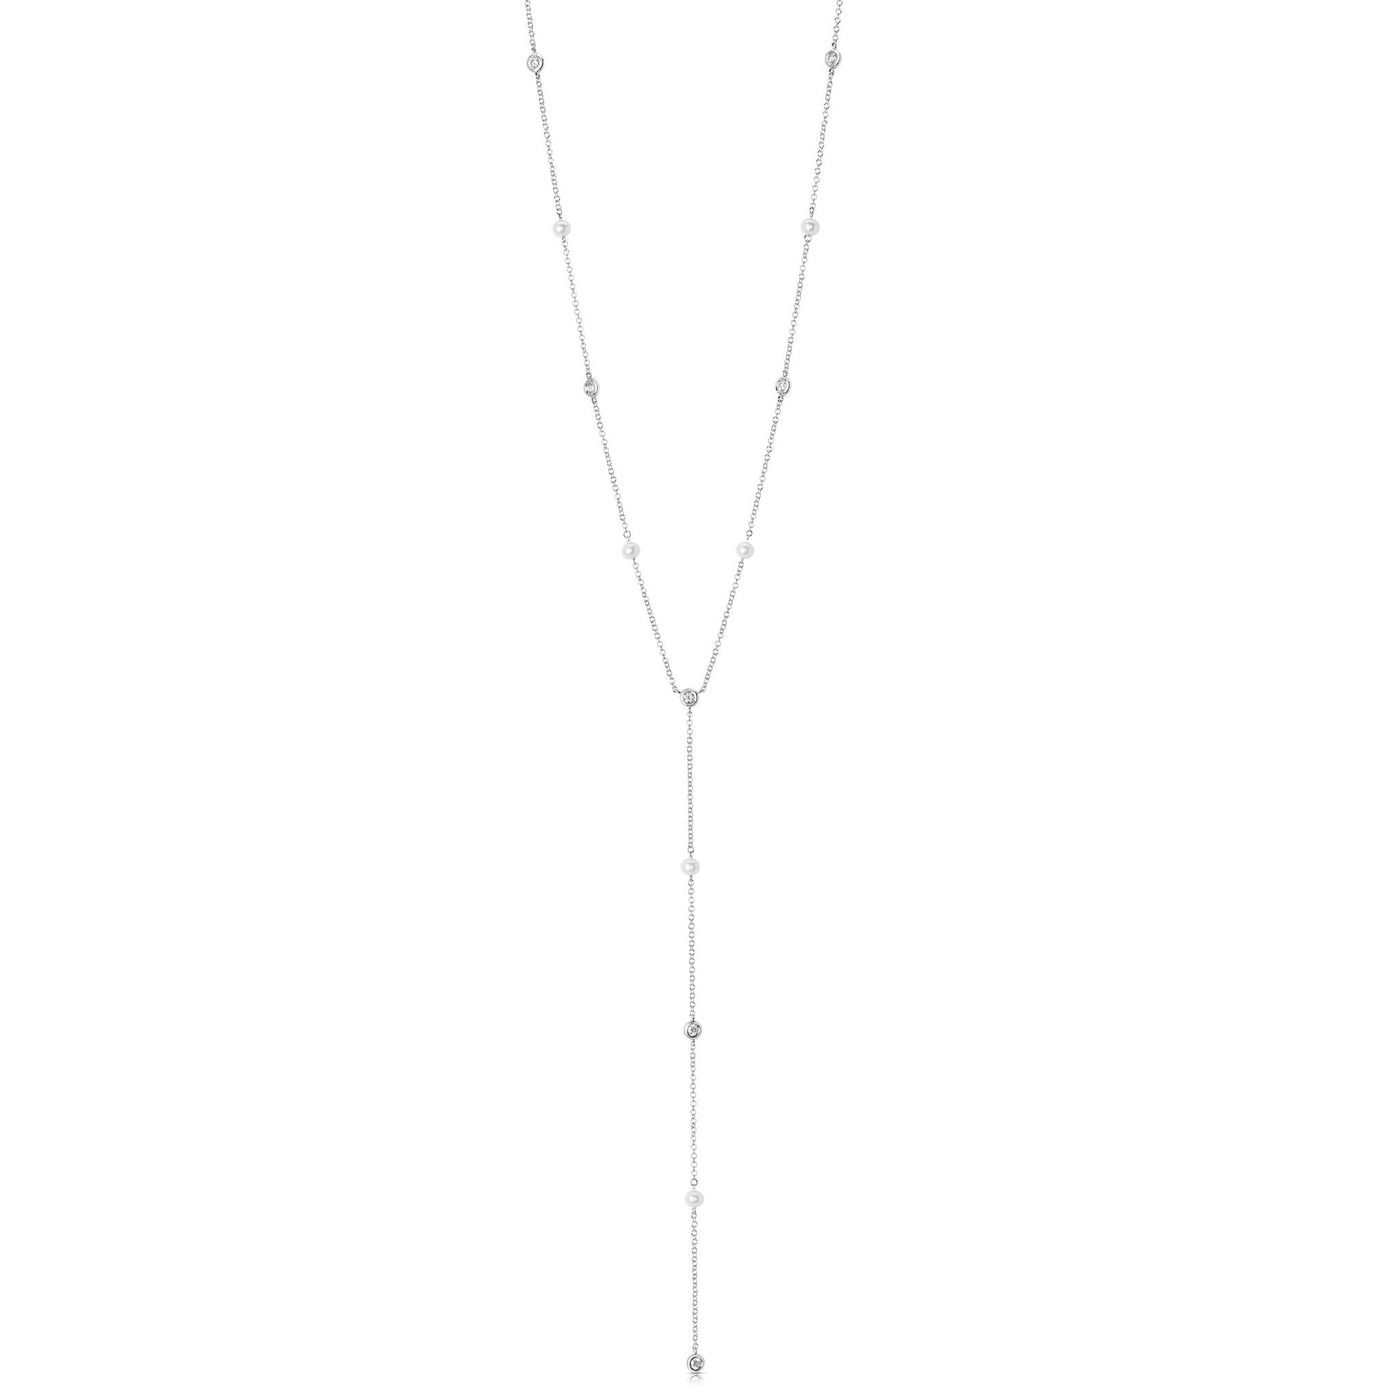 MK Luxury 14K White Gold 22" Adjustable .28ctw Freshwater Pearl and Diamonds Lariat Necklace